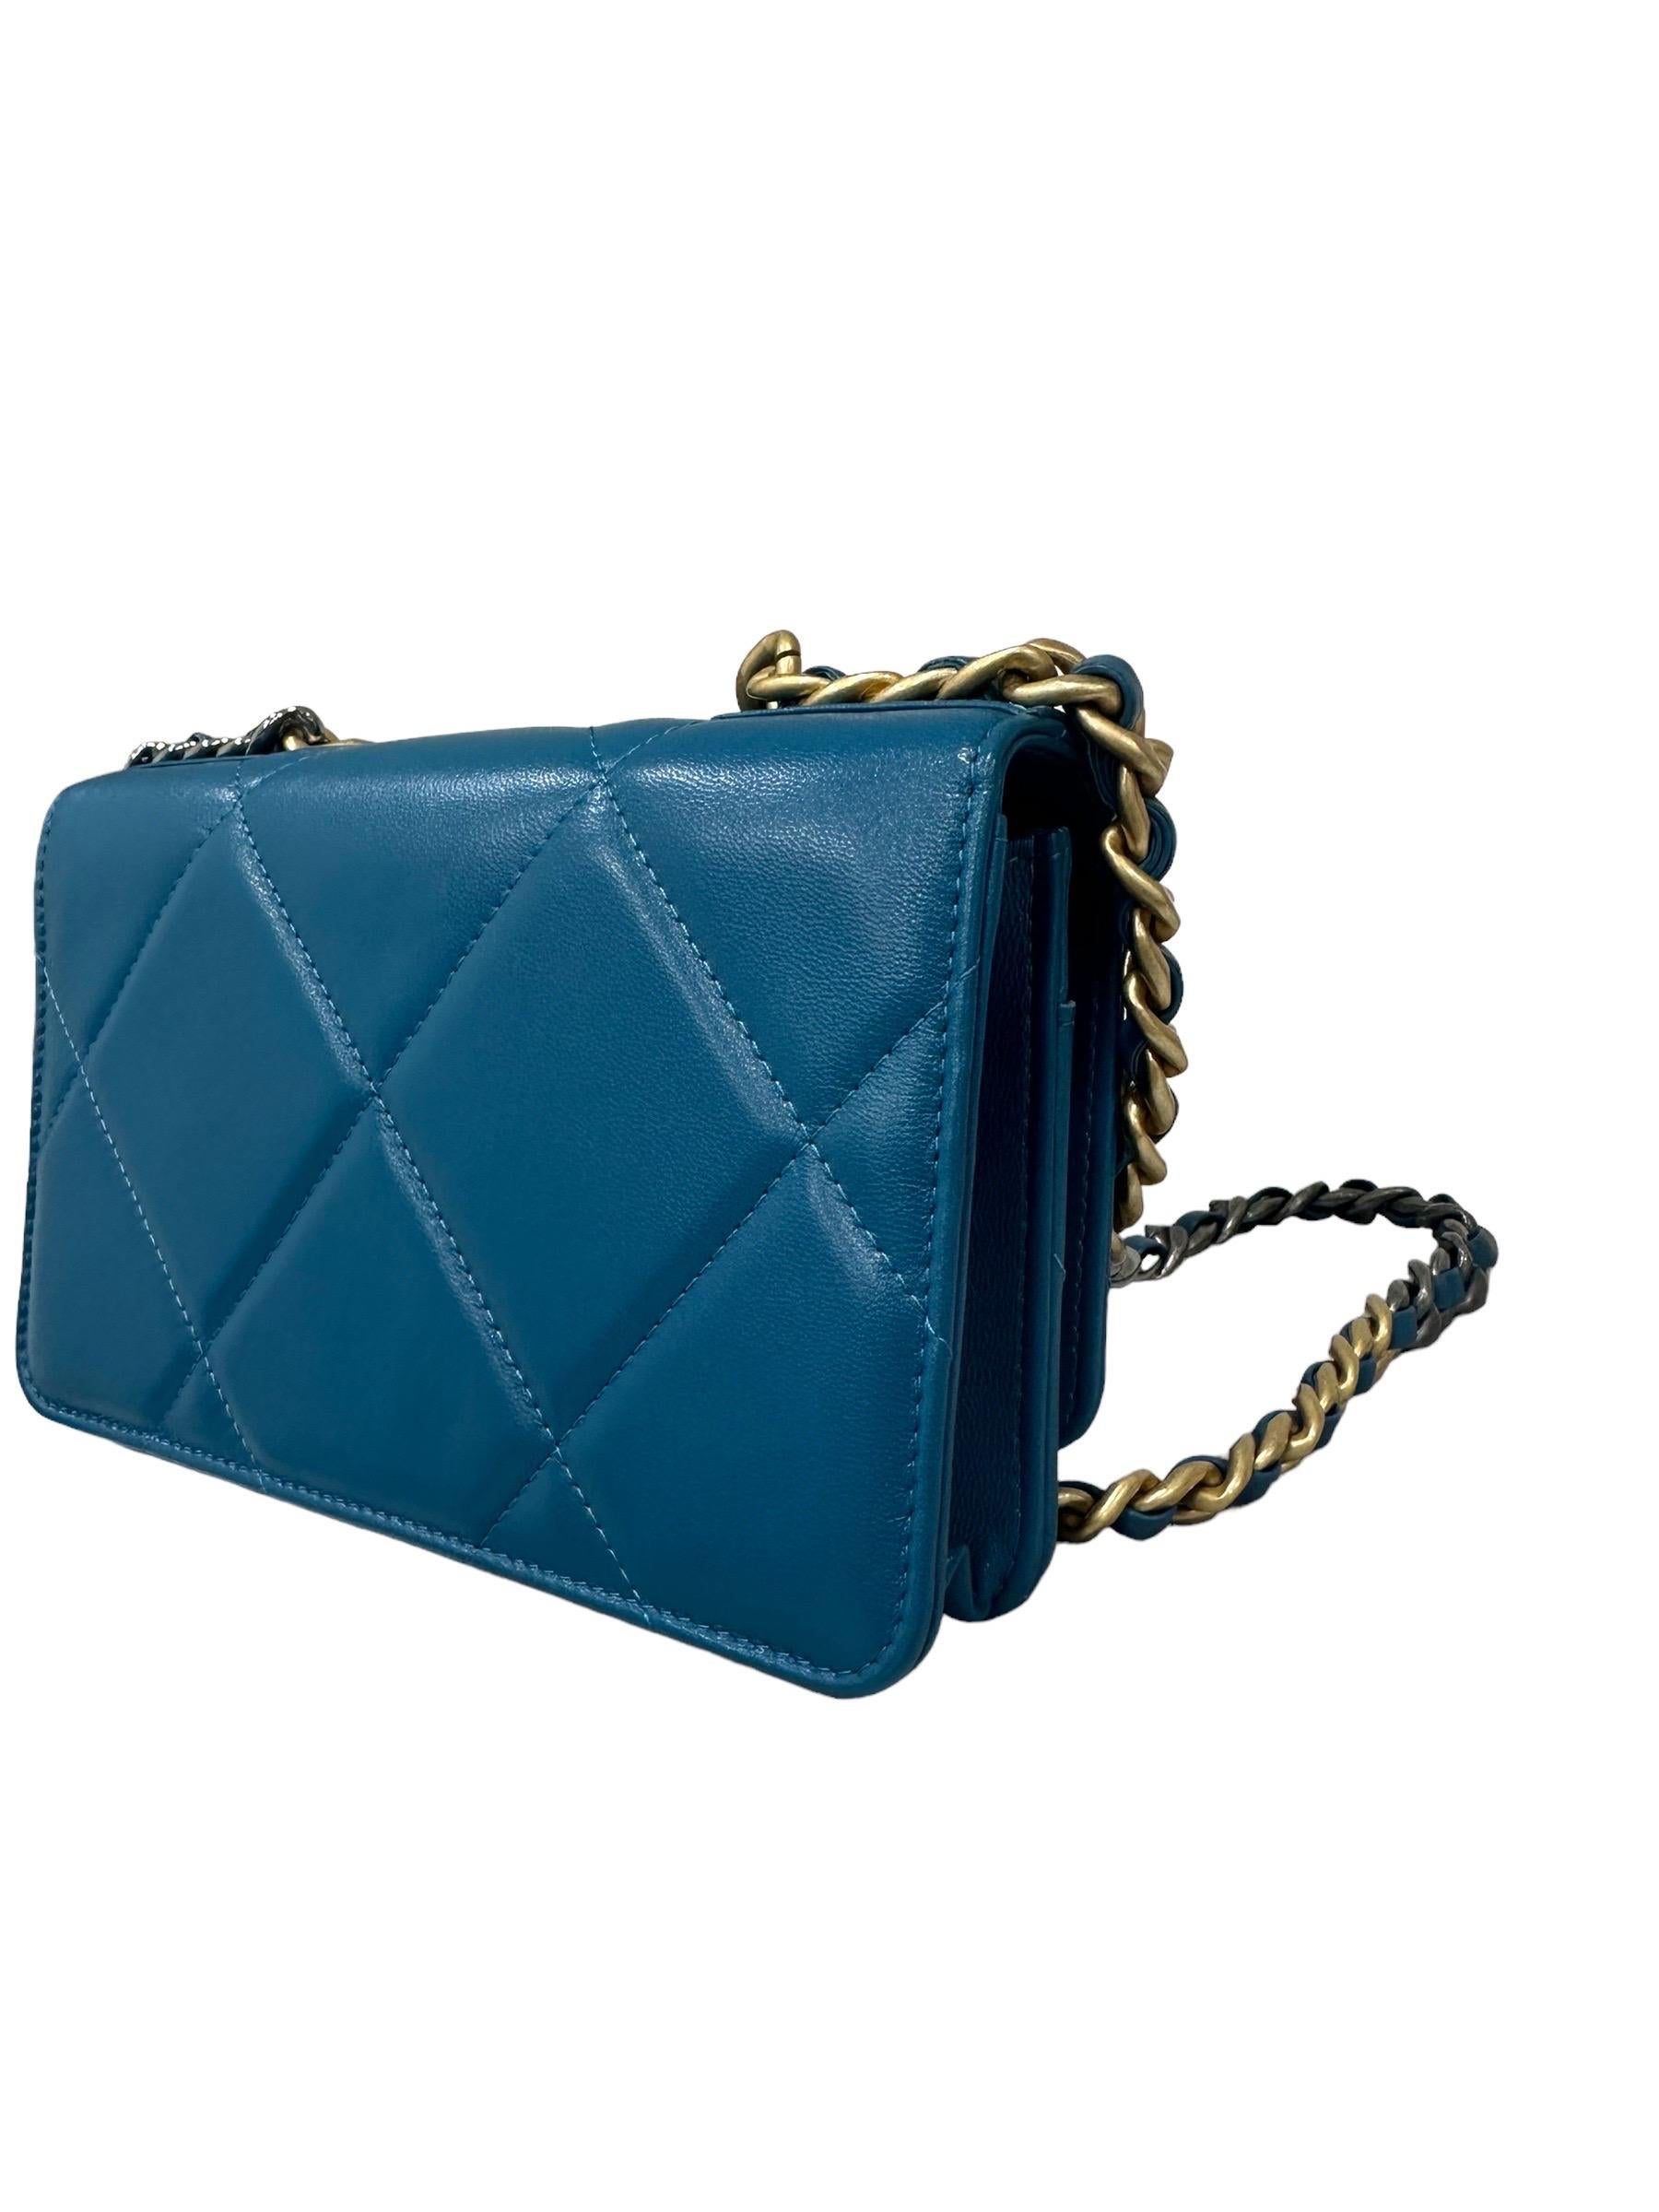 2021 Chanel 19 Wallet On Chain Blue Leather 2